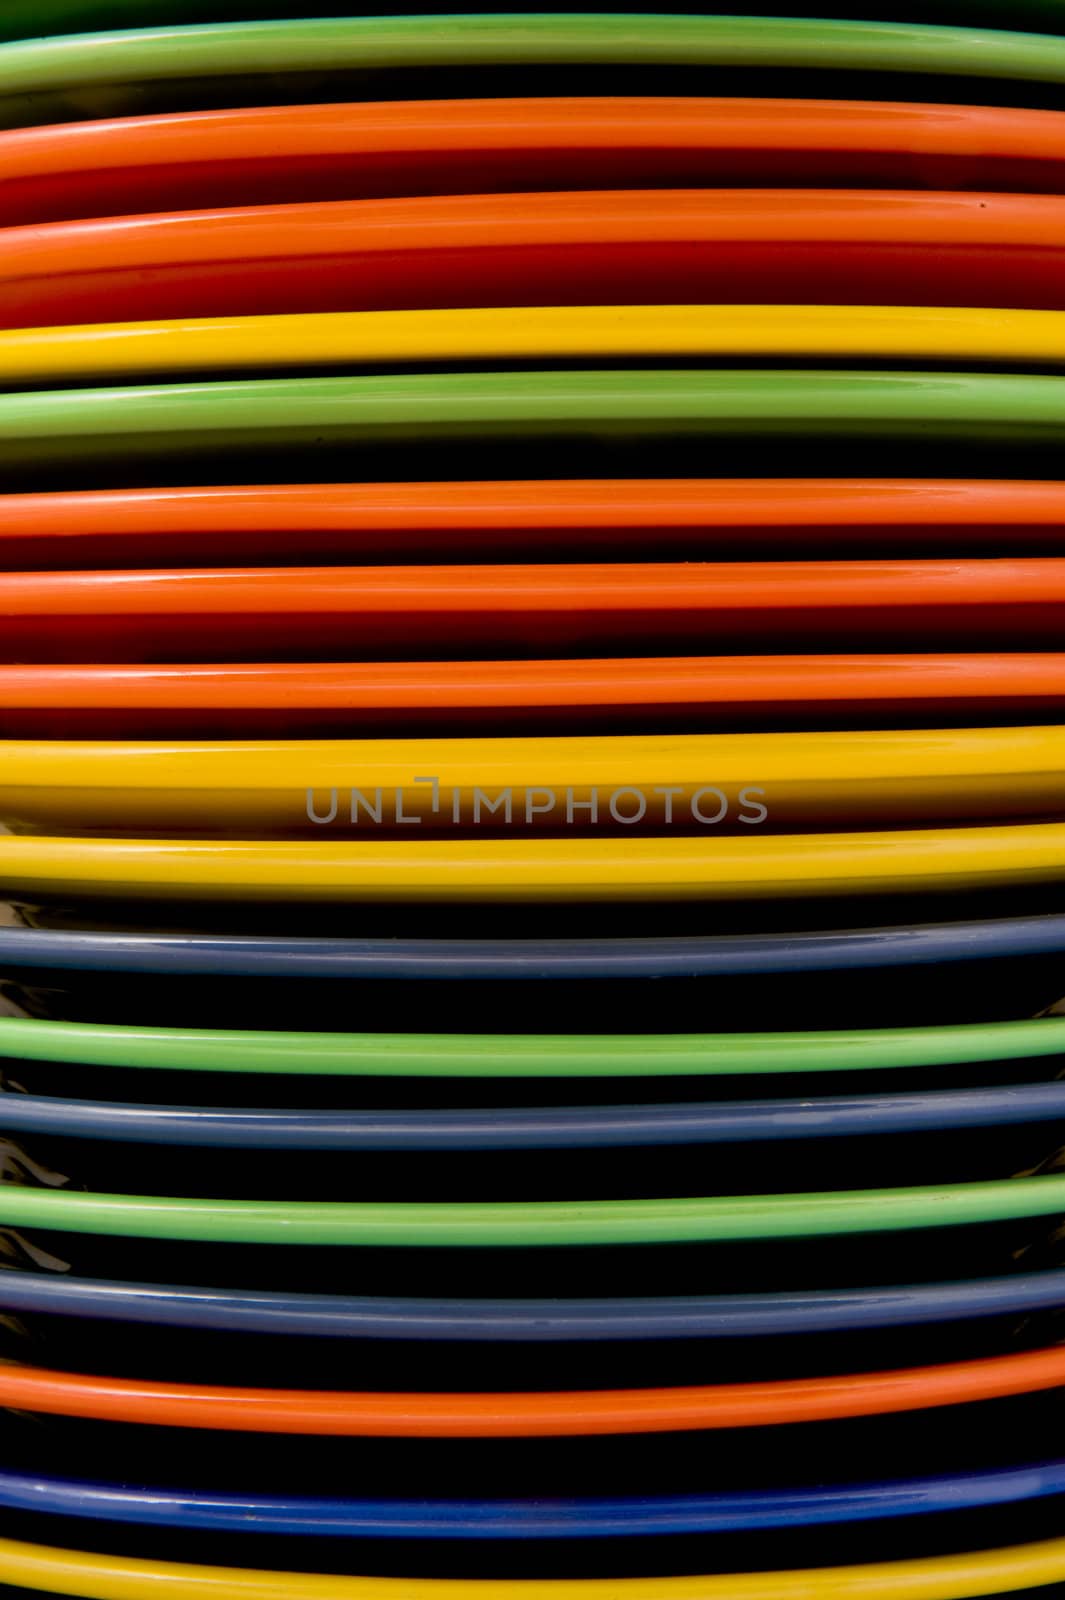 Multi-colored plates taken as close up